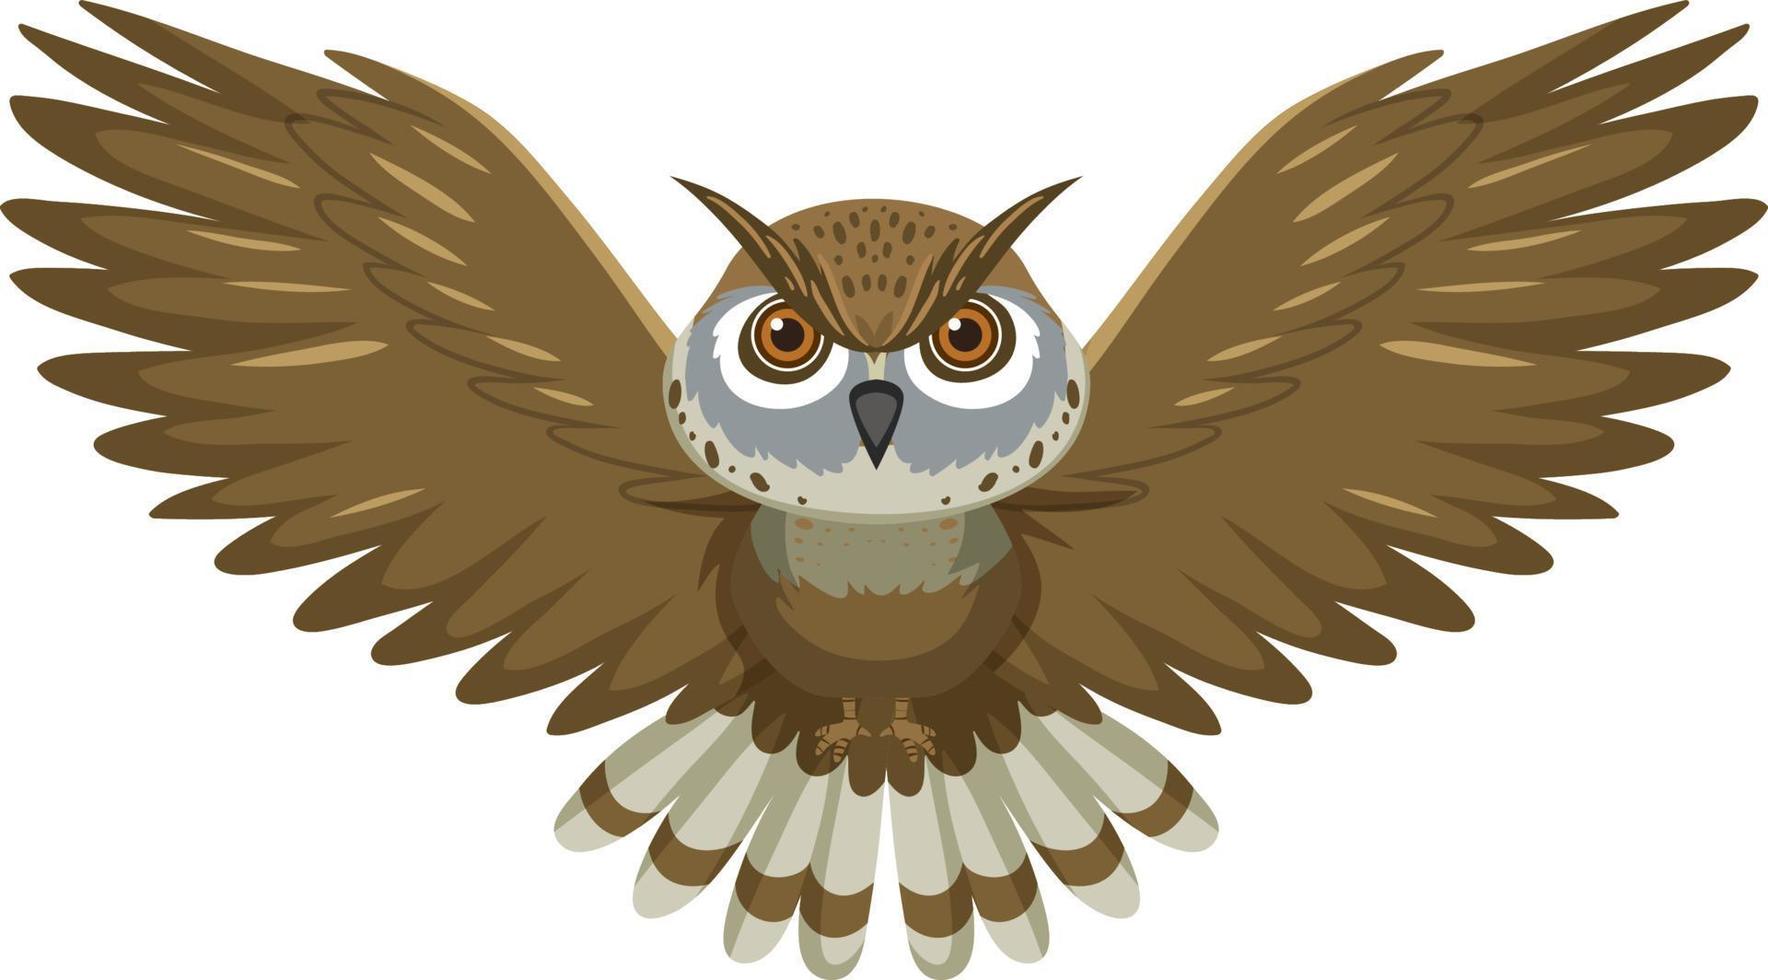 Front of owl flying in cartoon style vector